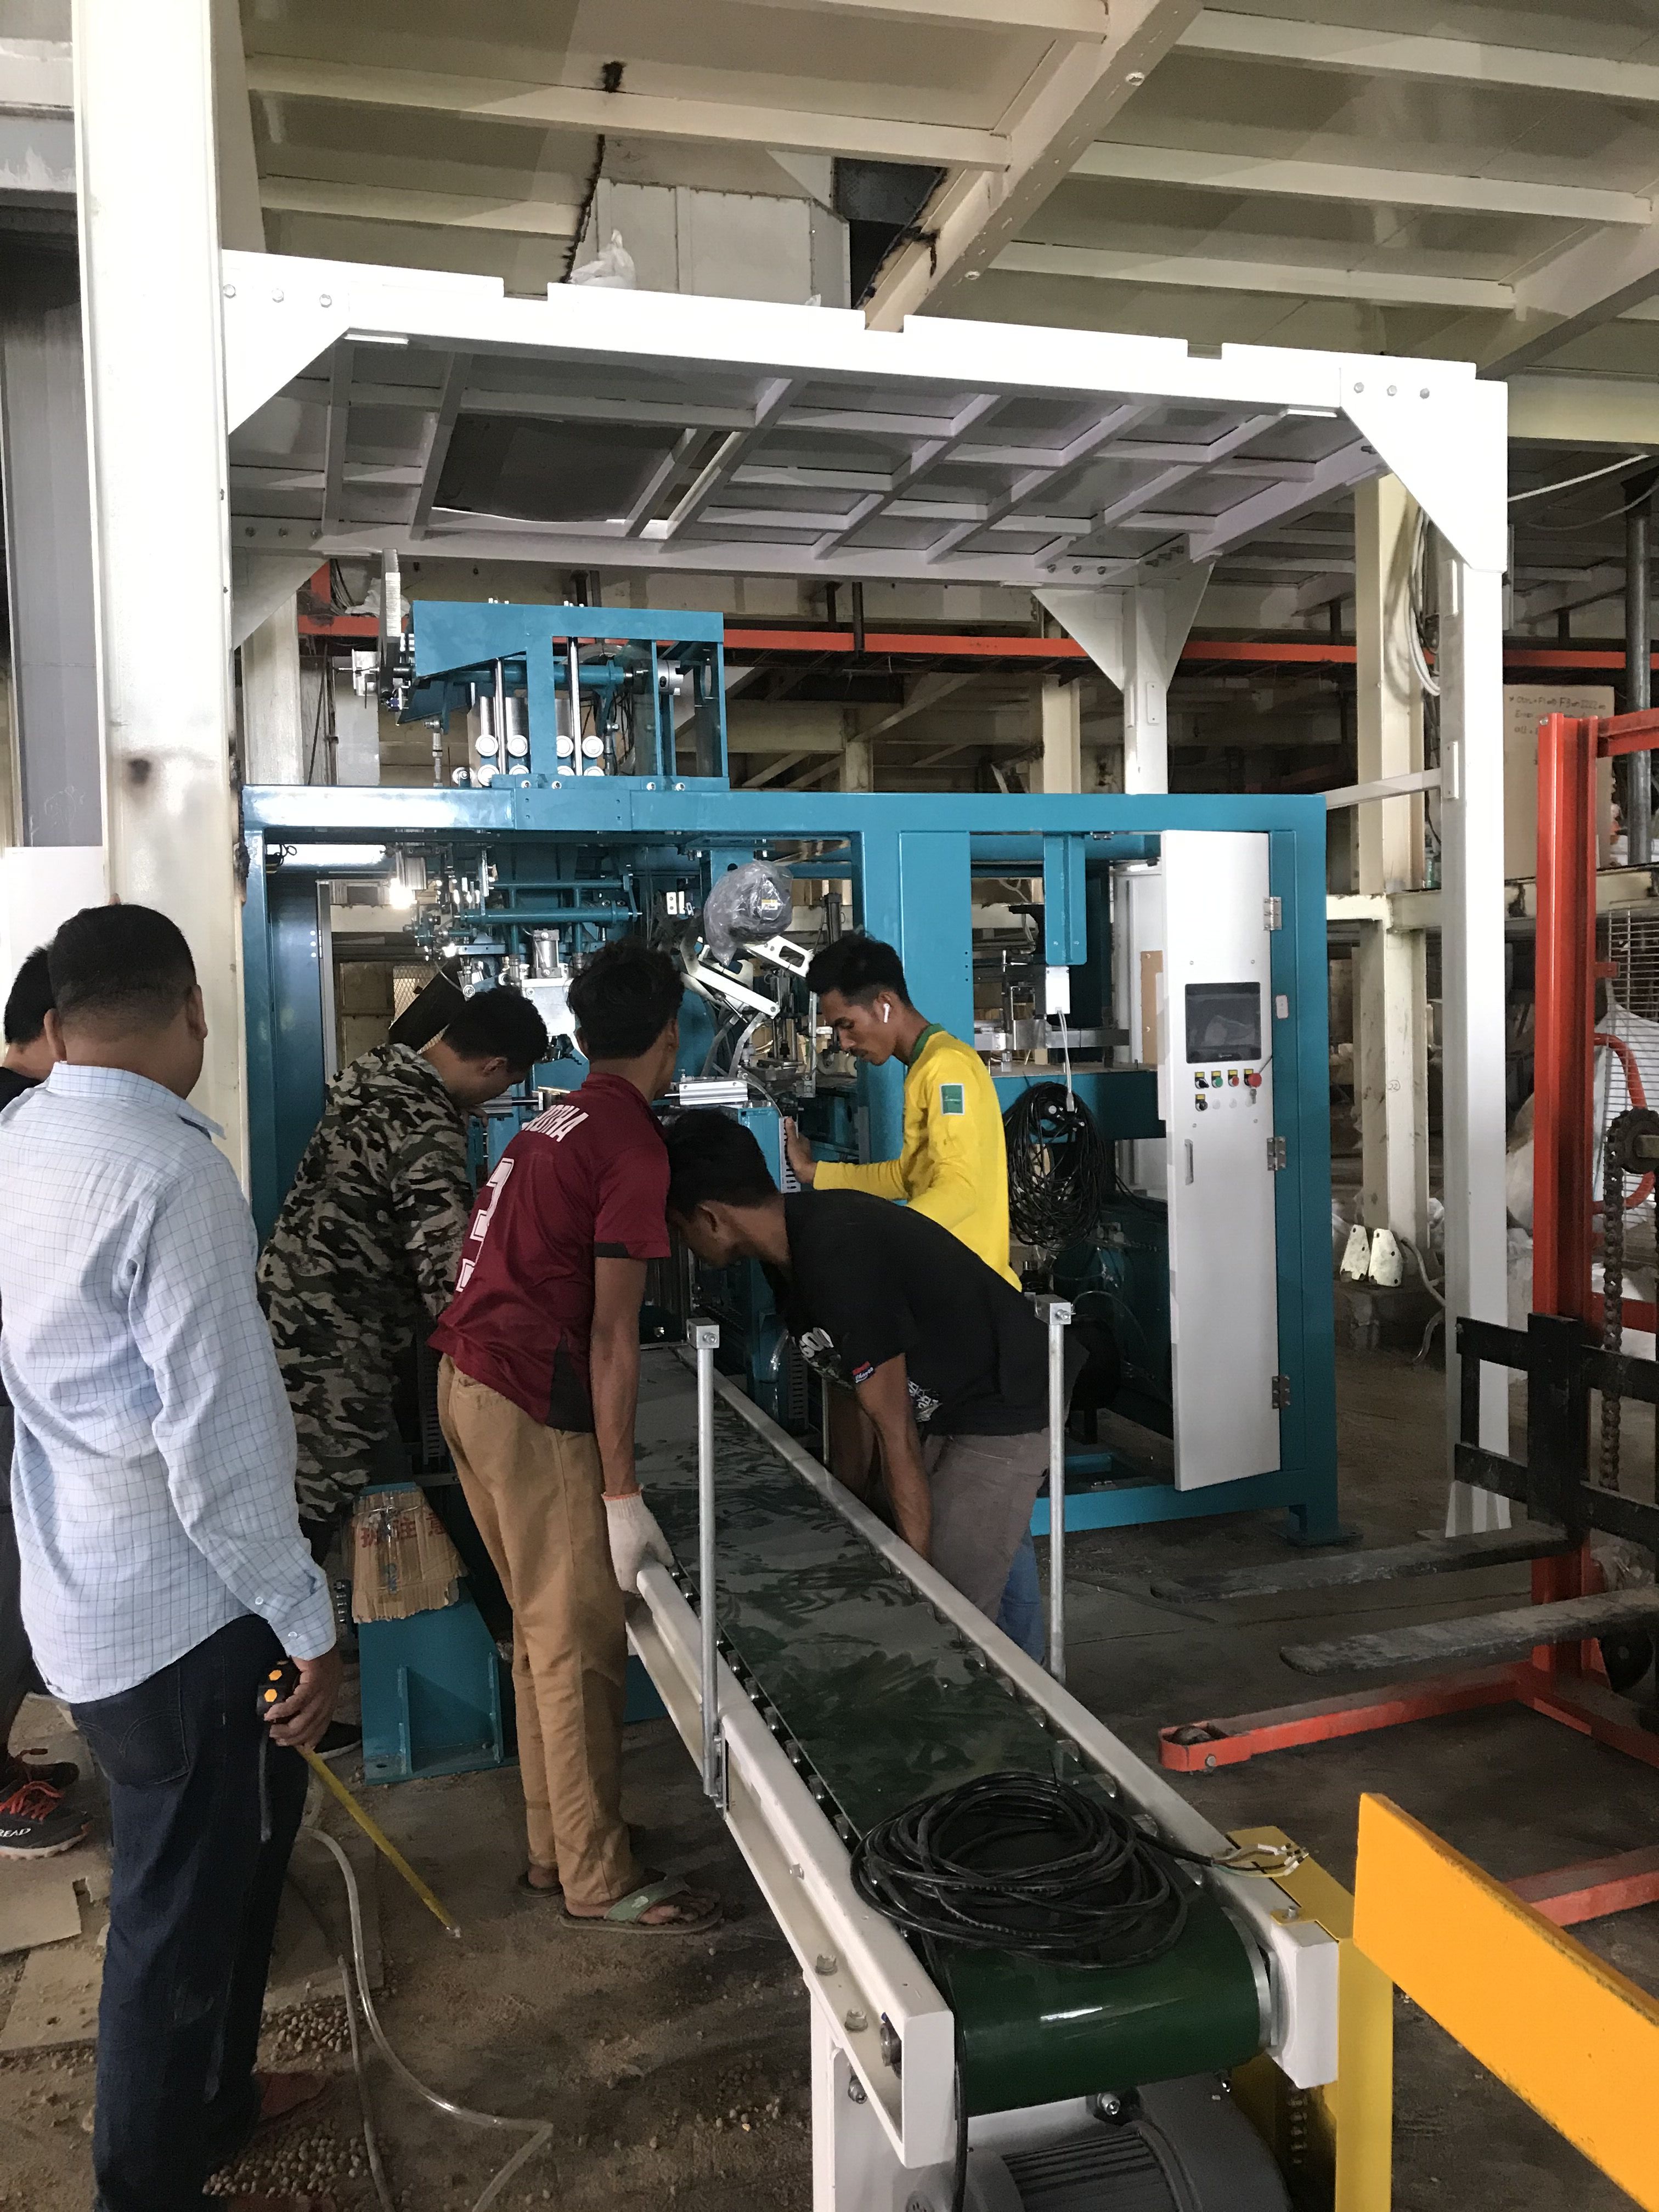 Agro Feed Packing system Agro Feed Packing Machine Belt-feeder Packing Machine Agro Feed bagging machine WUXI HY MACHINERY CO., LTD.  Belt-feeder Packing Machine Belt-feeding type Packing Machine, ani